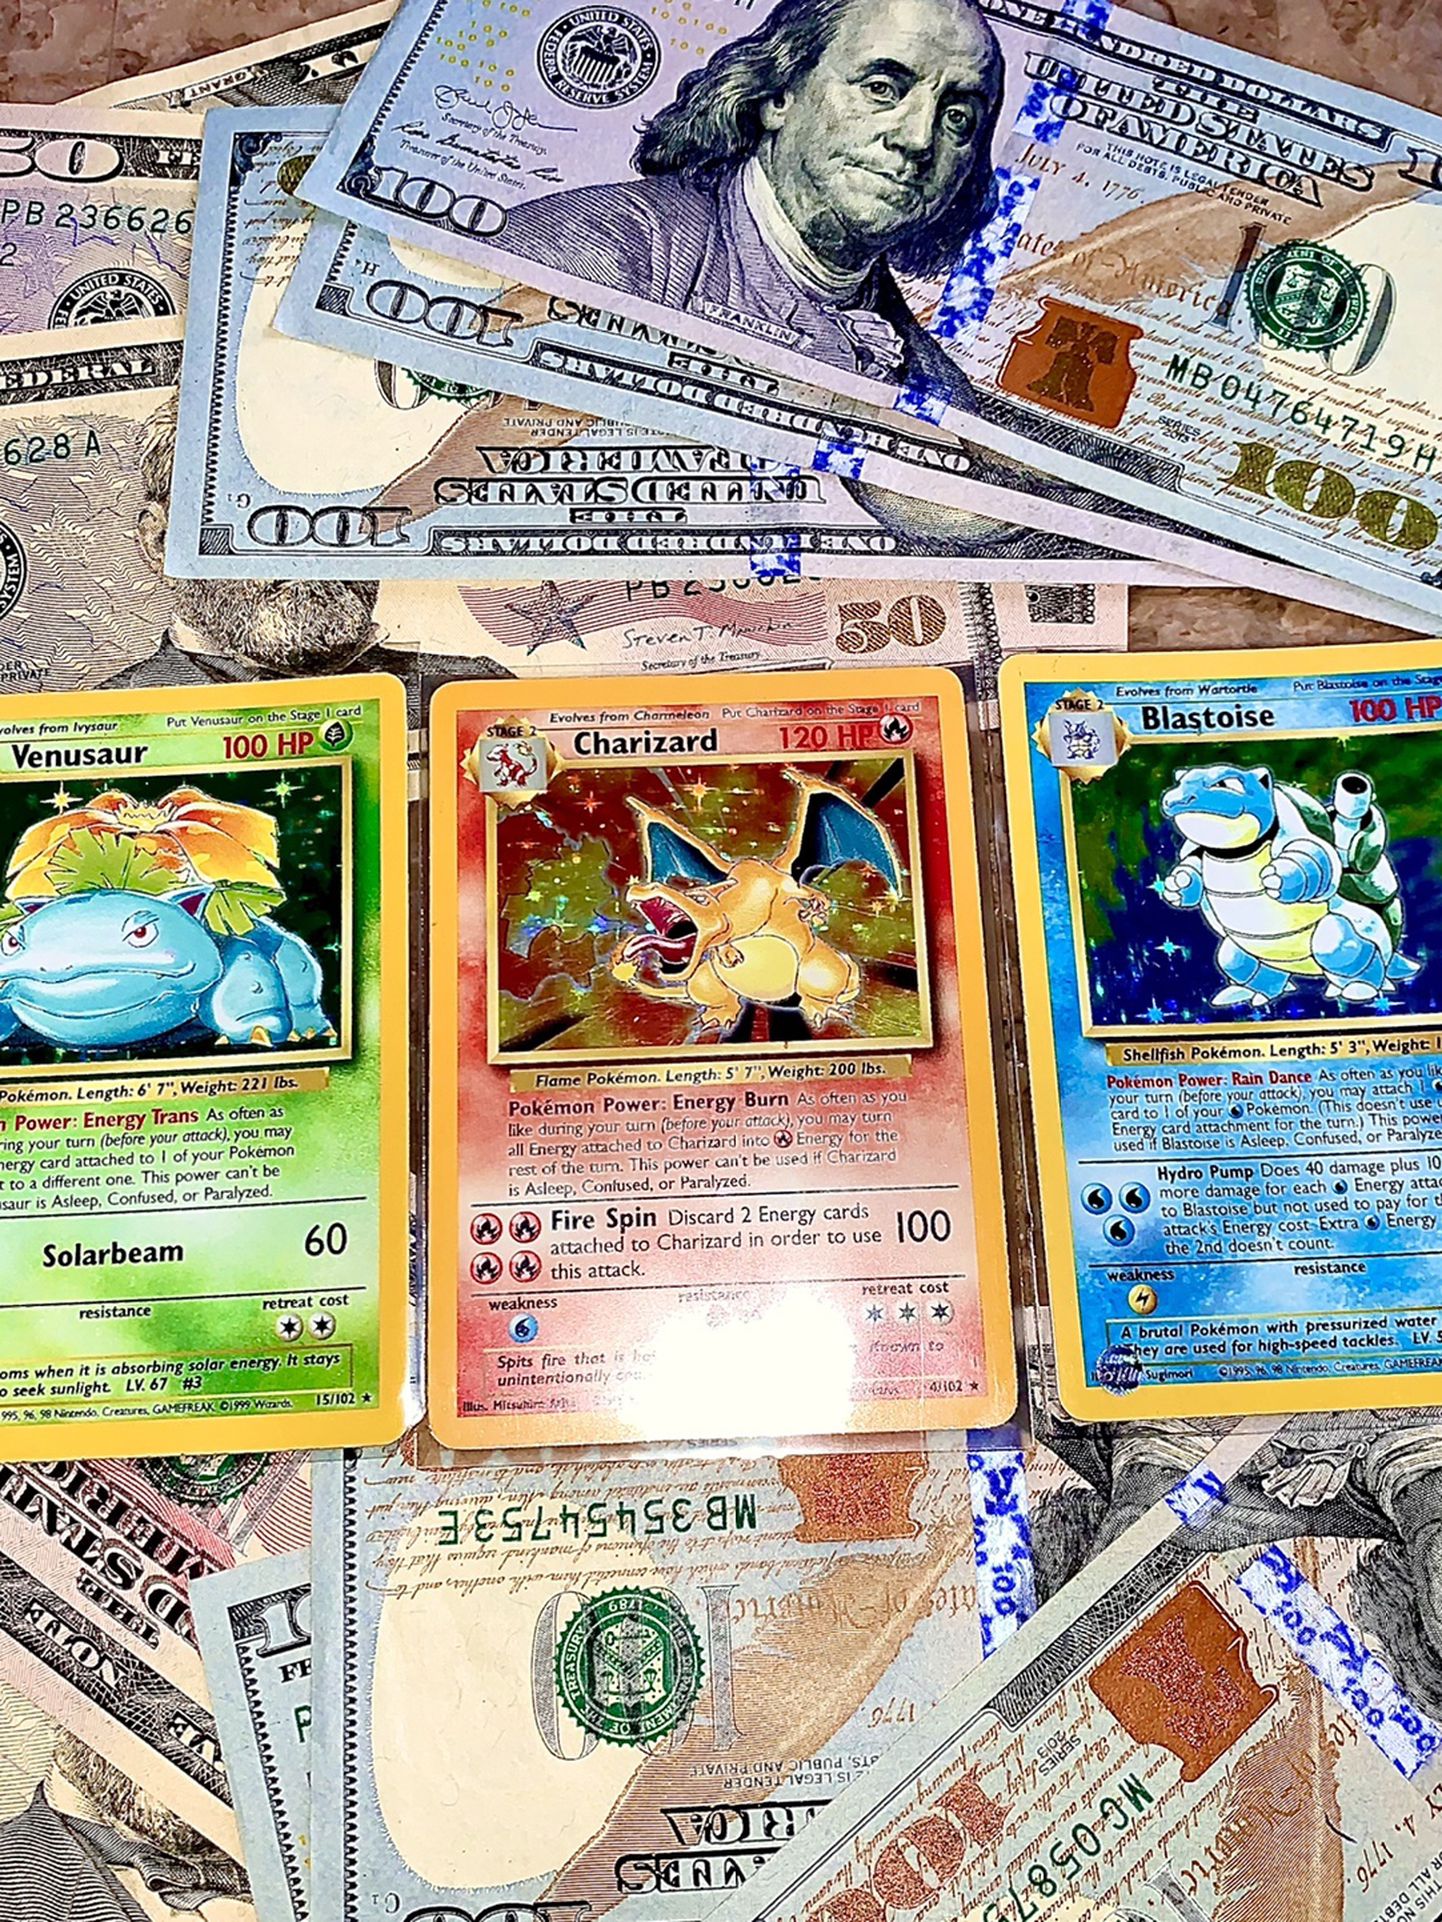 Paying cash For Pokémon Cards - Pokemon Packs Boxes!